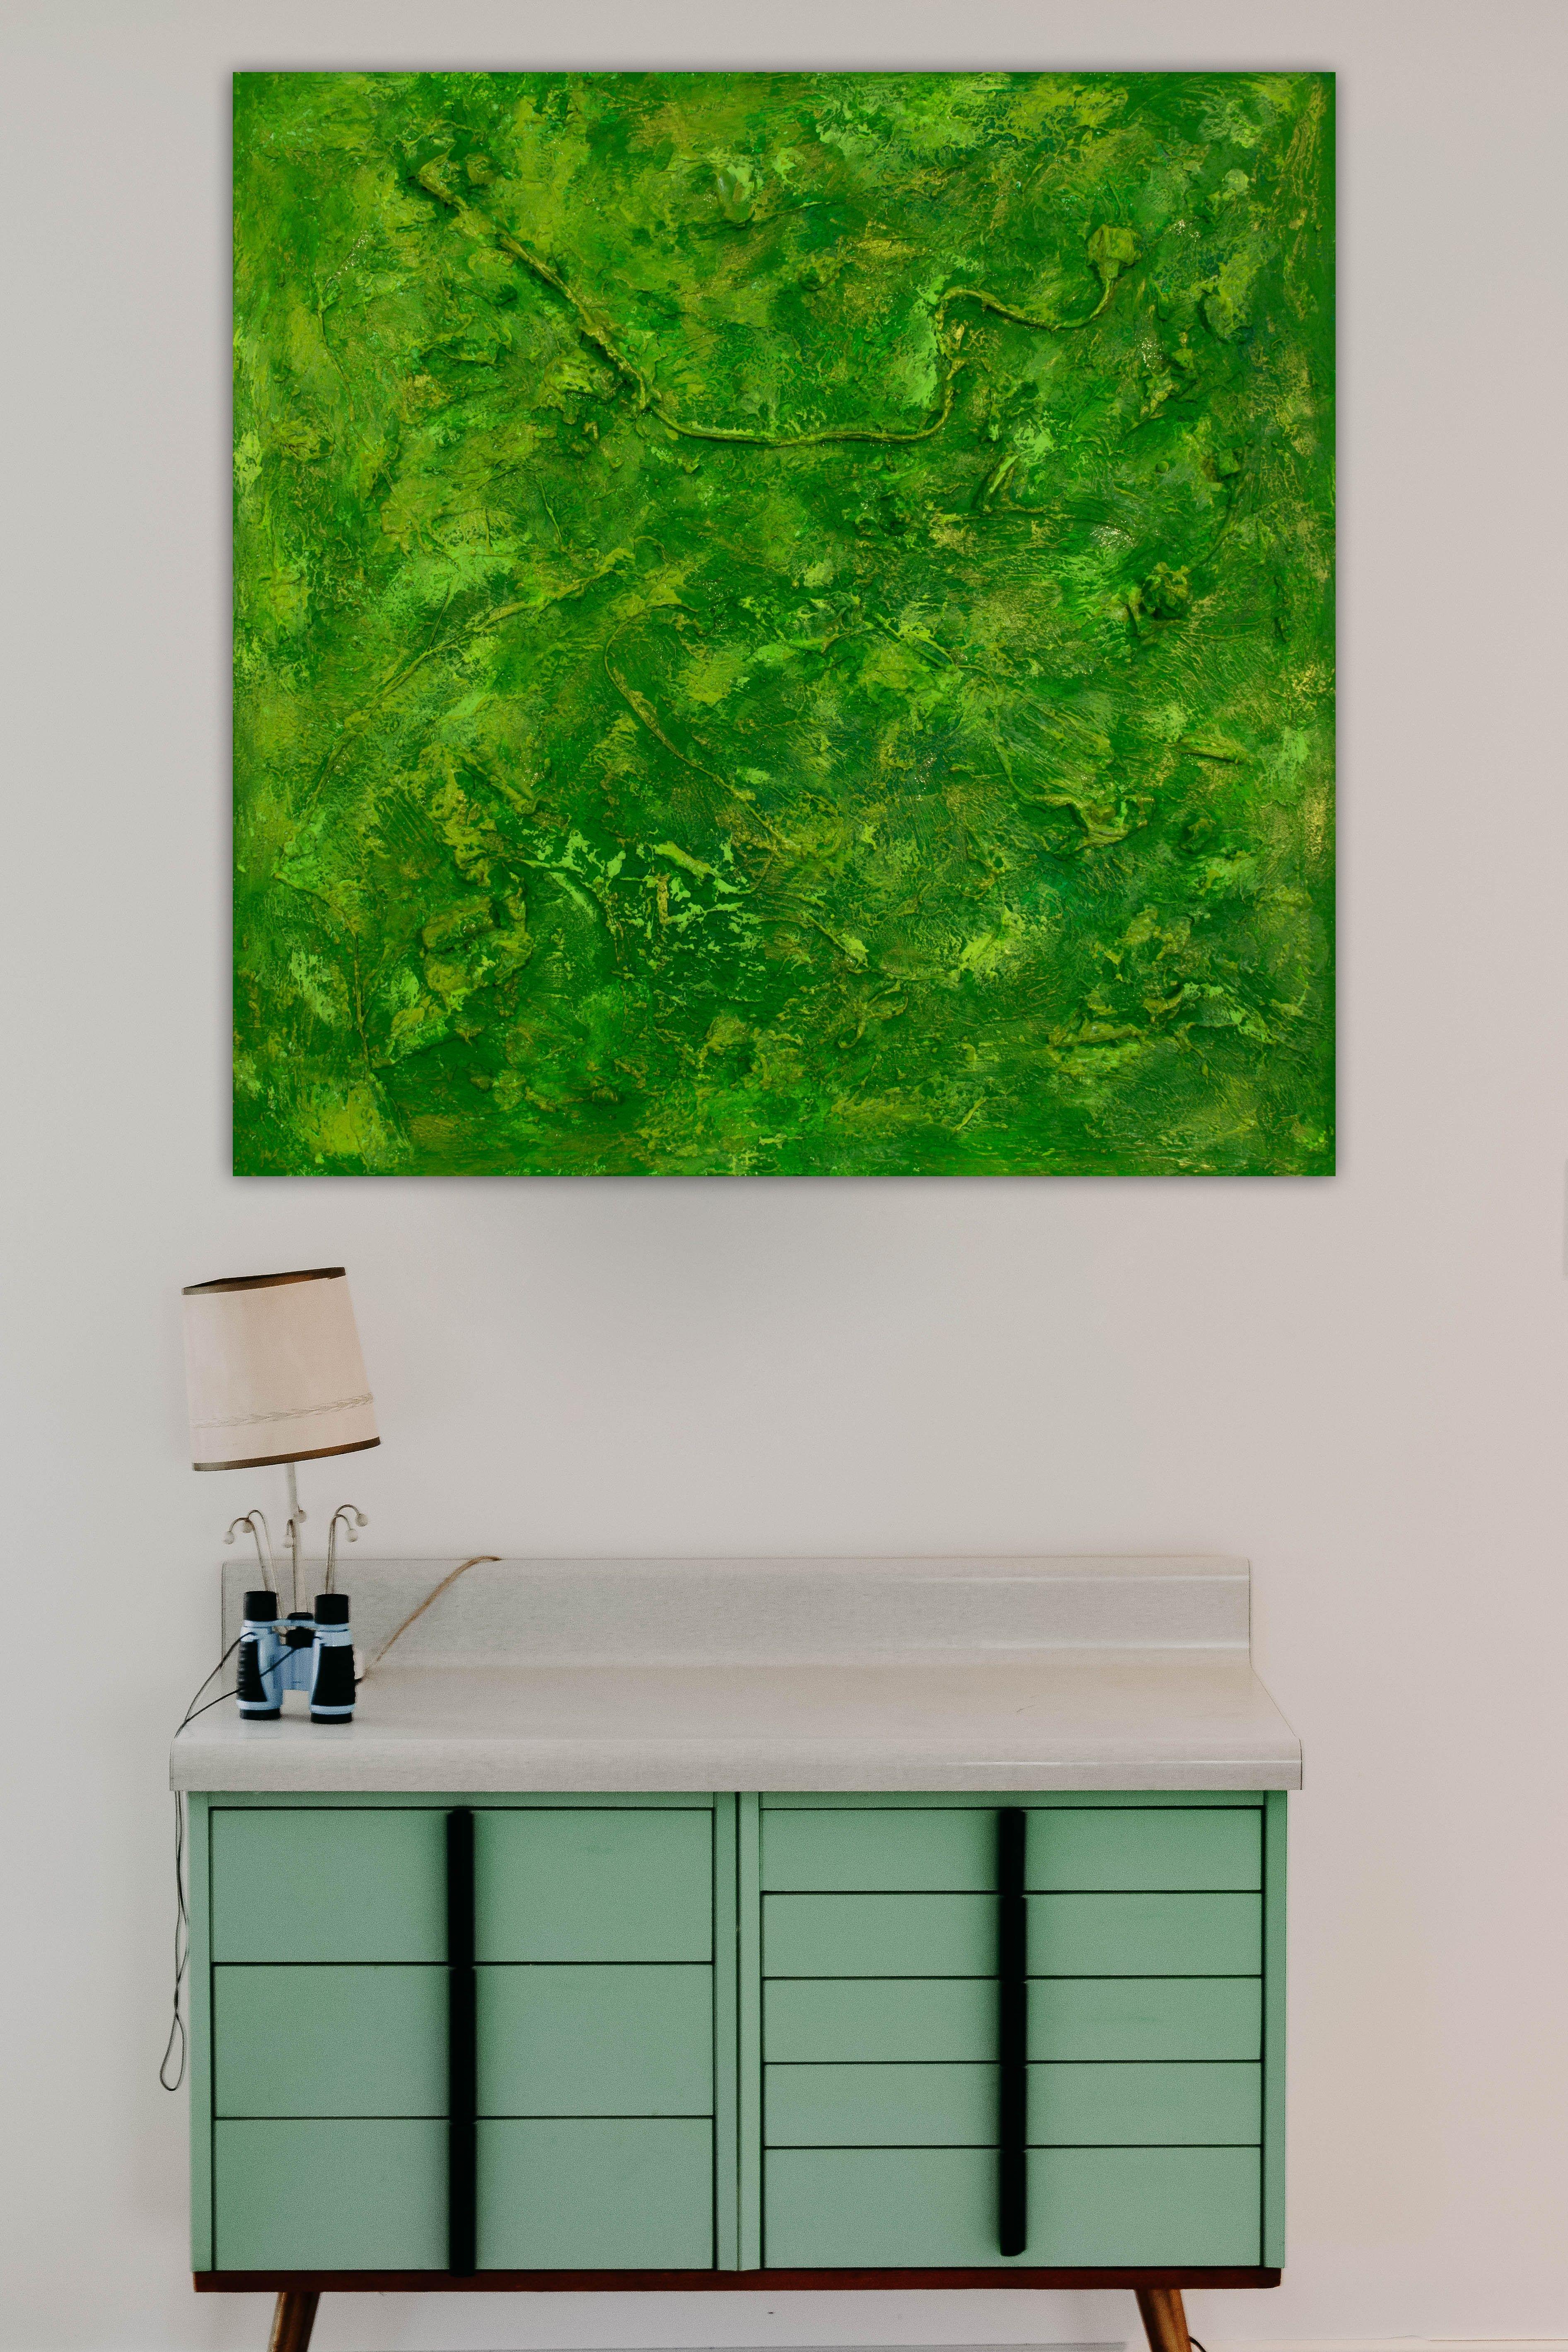 Praxidike, Painting, Acrylic on Canvas - Green Abstract Painting by Pamela Rys